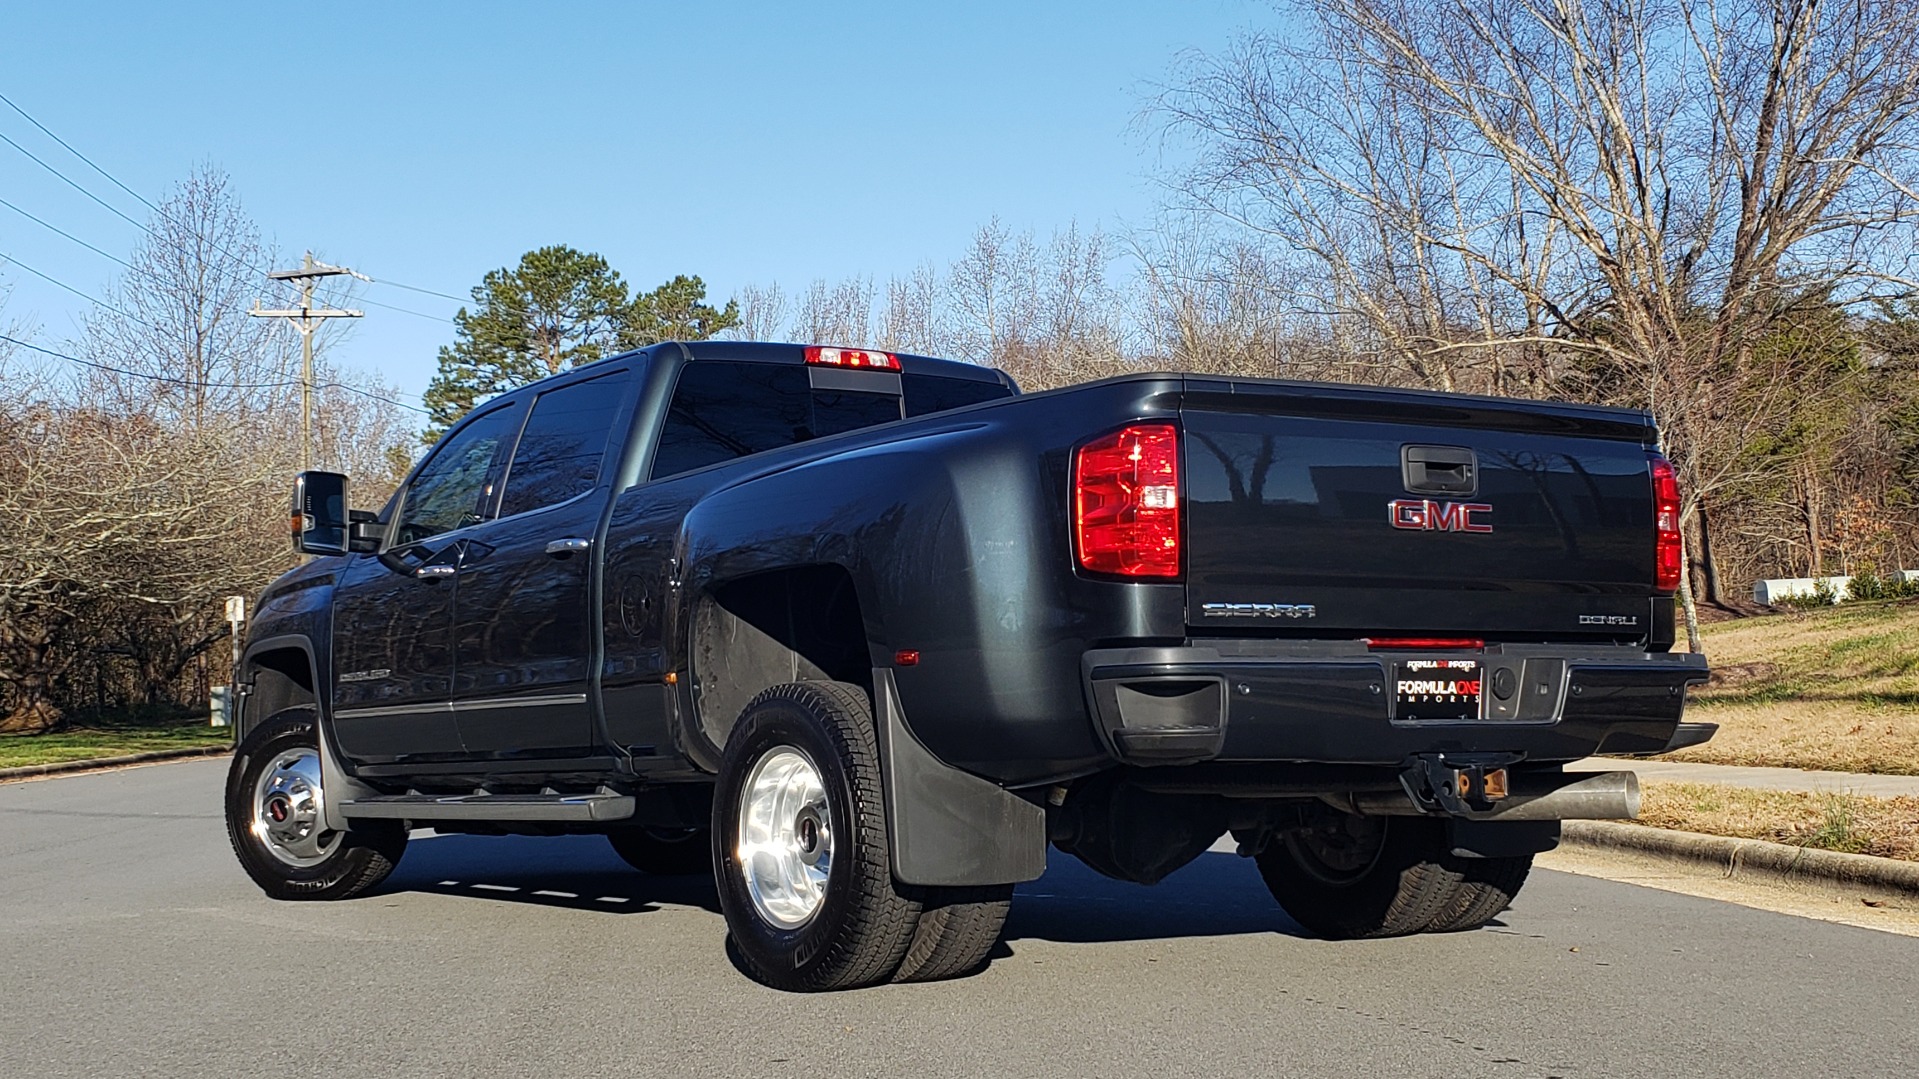 Used 2018 GMC SIERRA 3500HD DENALI 4X4 DUALLY / 6.6L DURAMAX PLUS / NAV / SUNROOF / REARVIEW for sale Sold at Formula Imports in Charlotte NC 28227 3